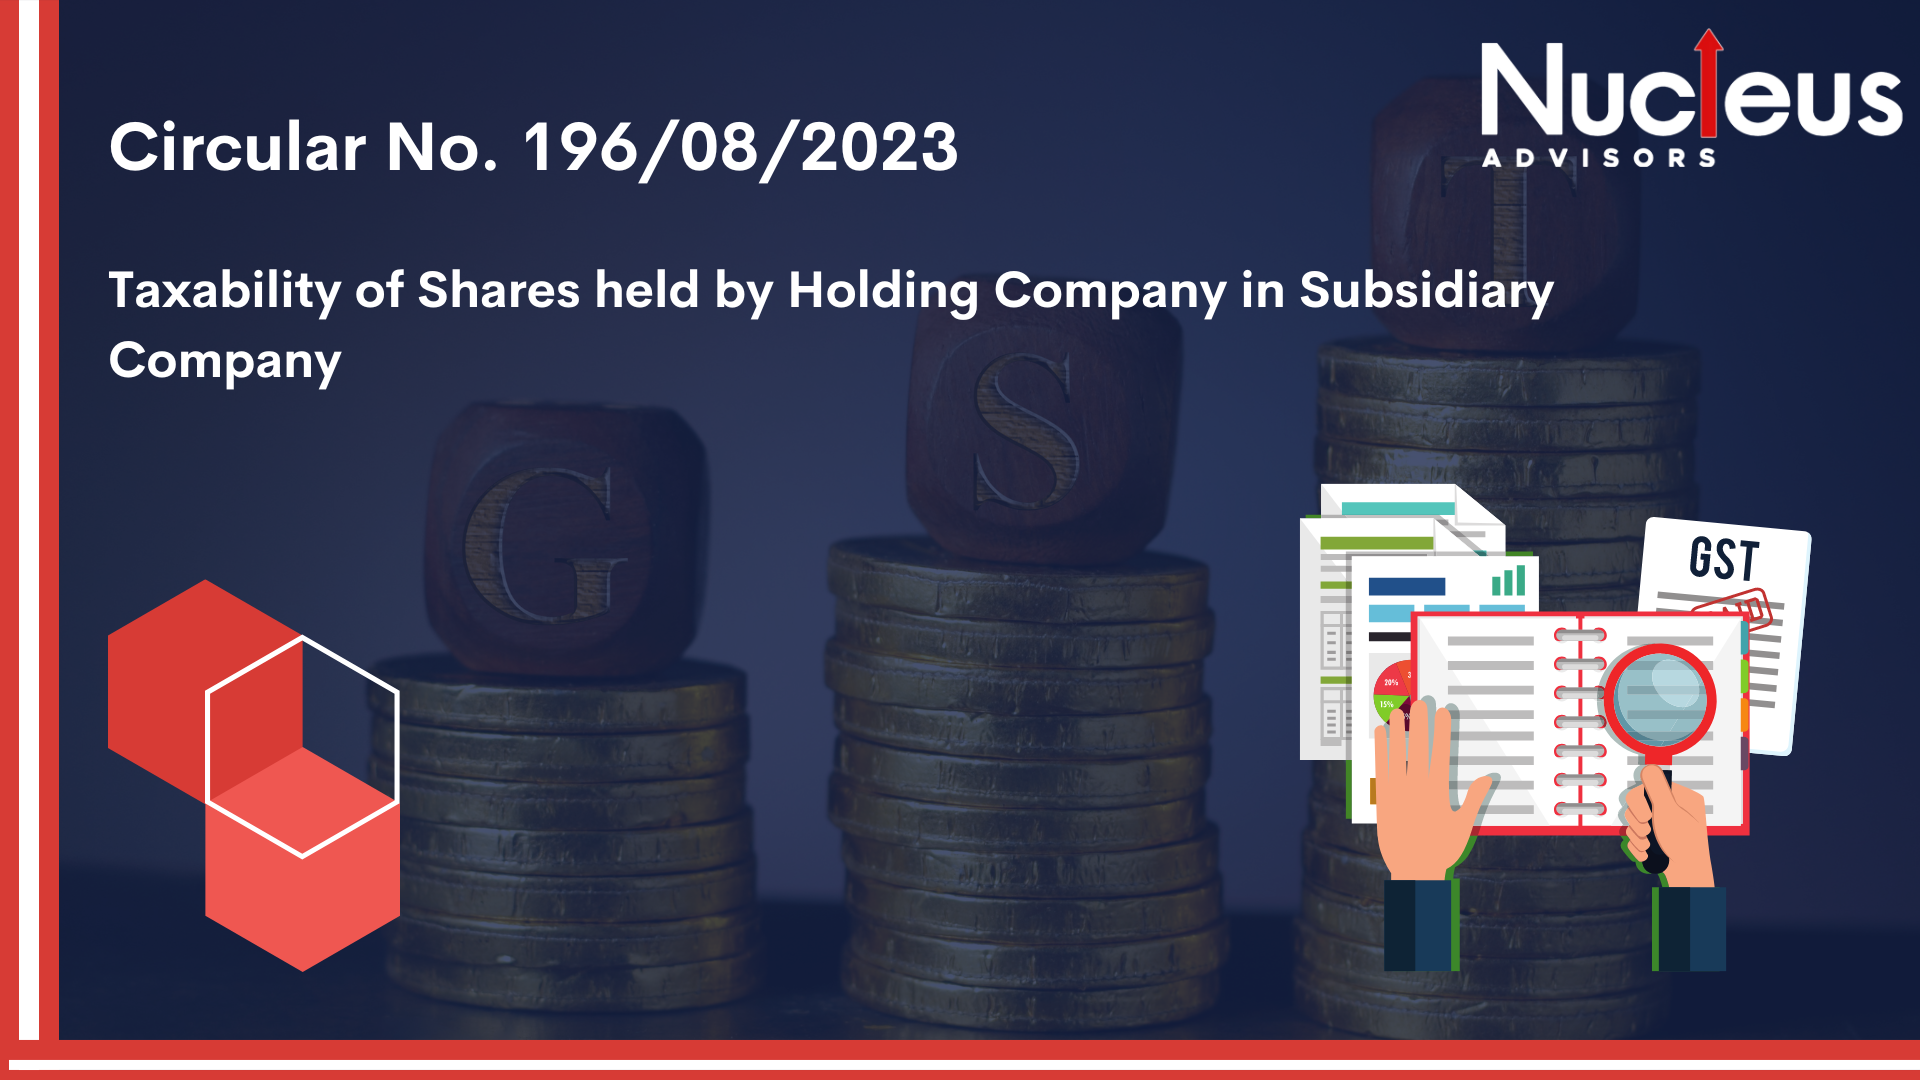 Latest GST update on taxability of shares in subsidiary company